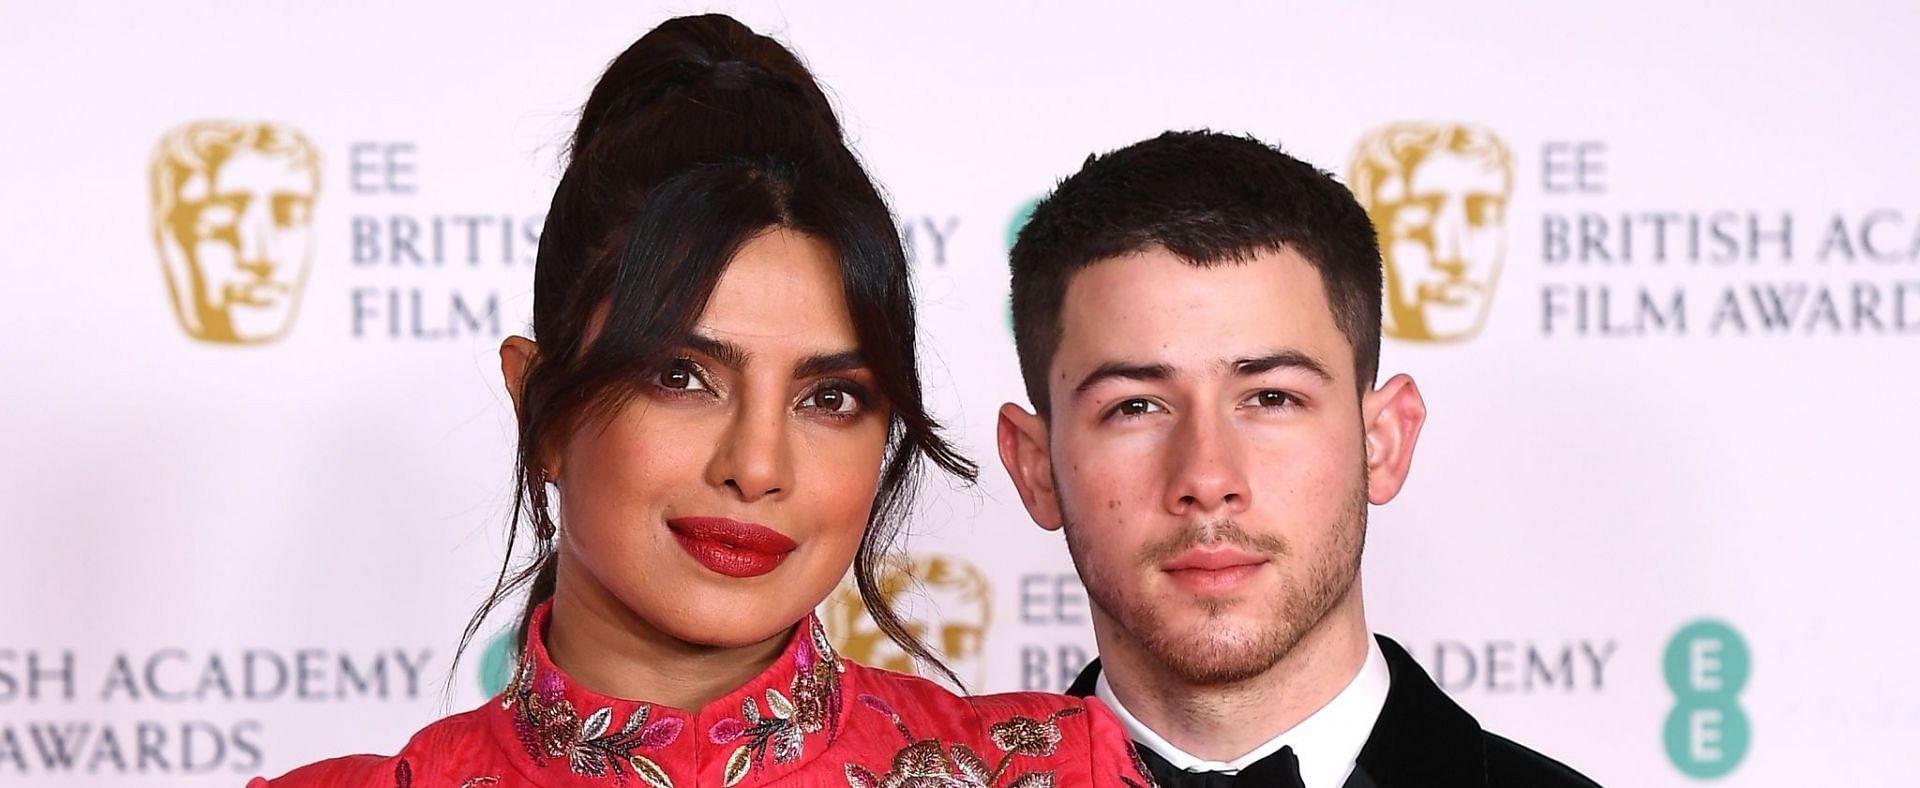 Priyanka Chopra and Nick Jonas opted for surrogacy due to their respective busy schedules (Image via Jeff Spicer/Getty Images)